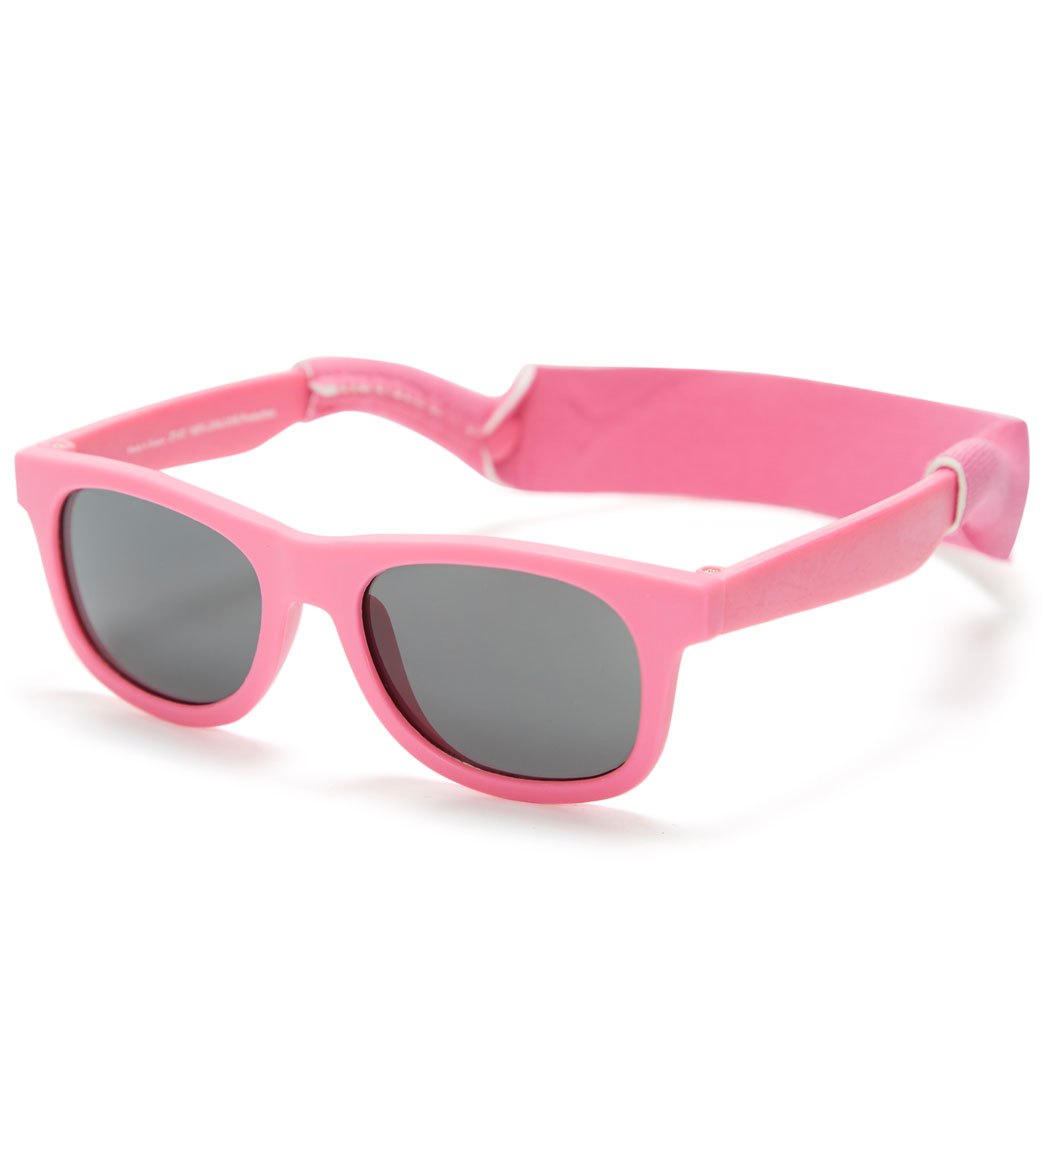 I Play. By Green Sprouts Flexible Sunglasses Baby - Pink 2T-4T 100% Rubber - Swimoutlet.com